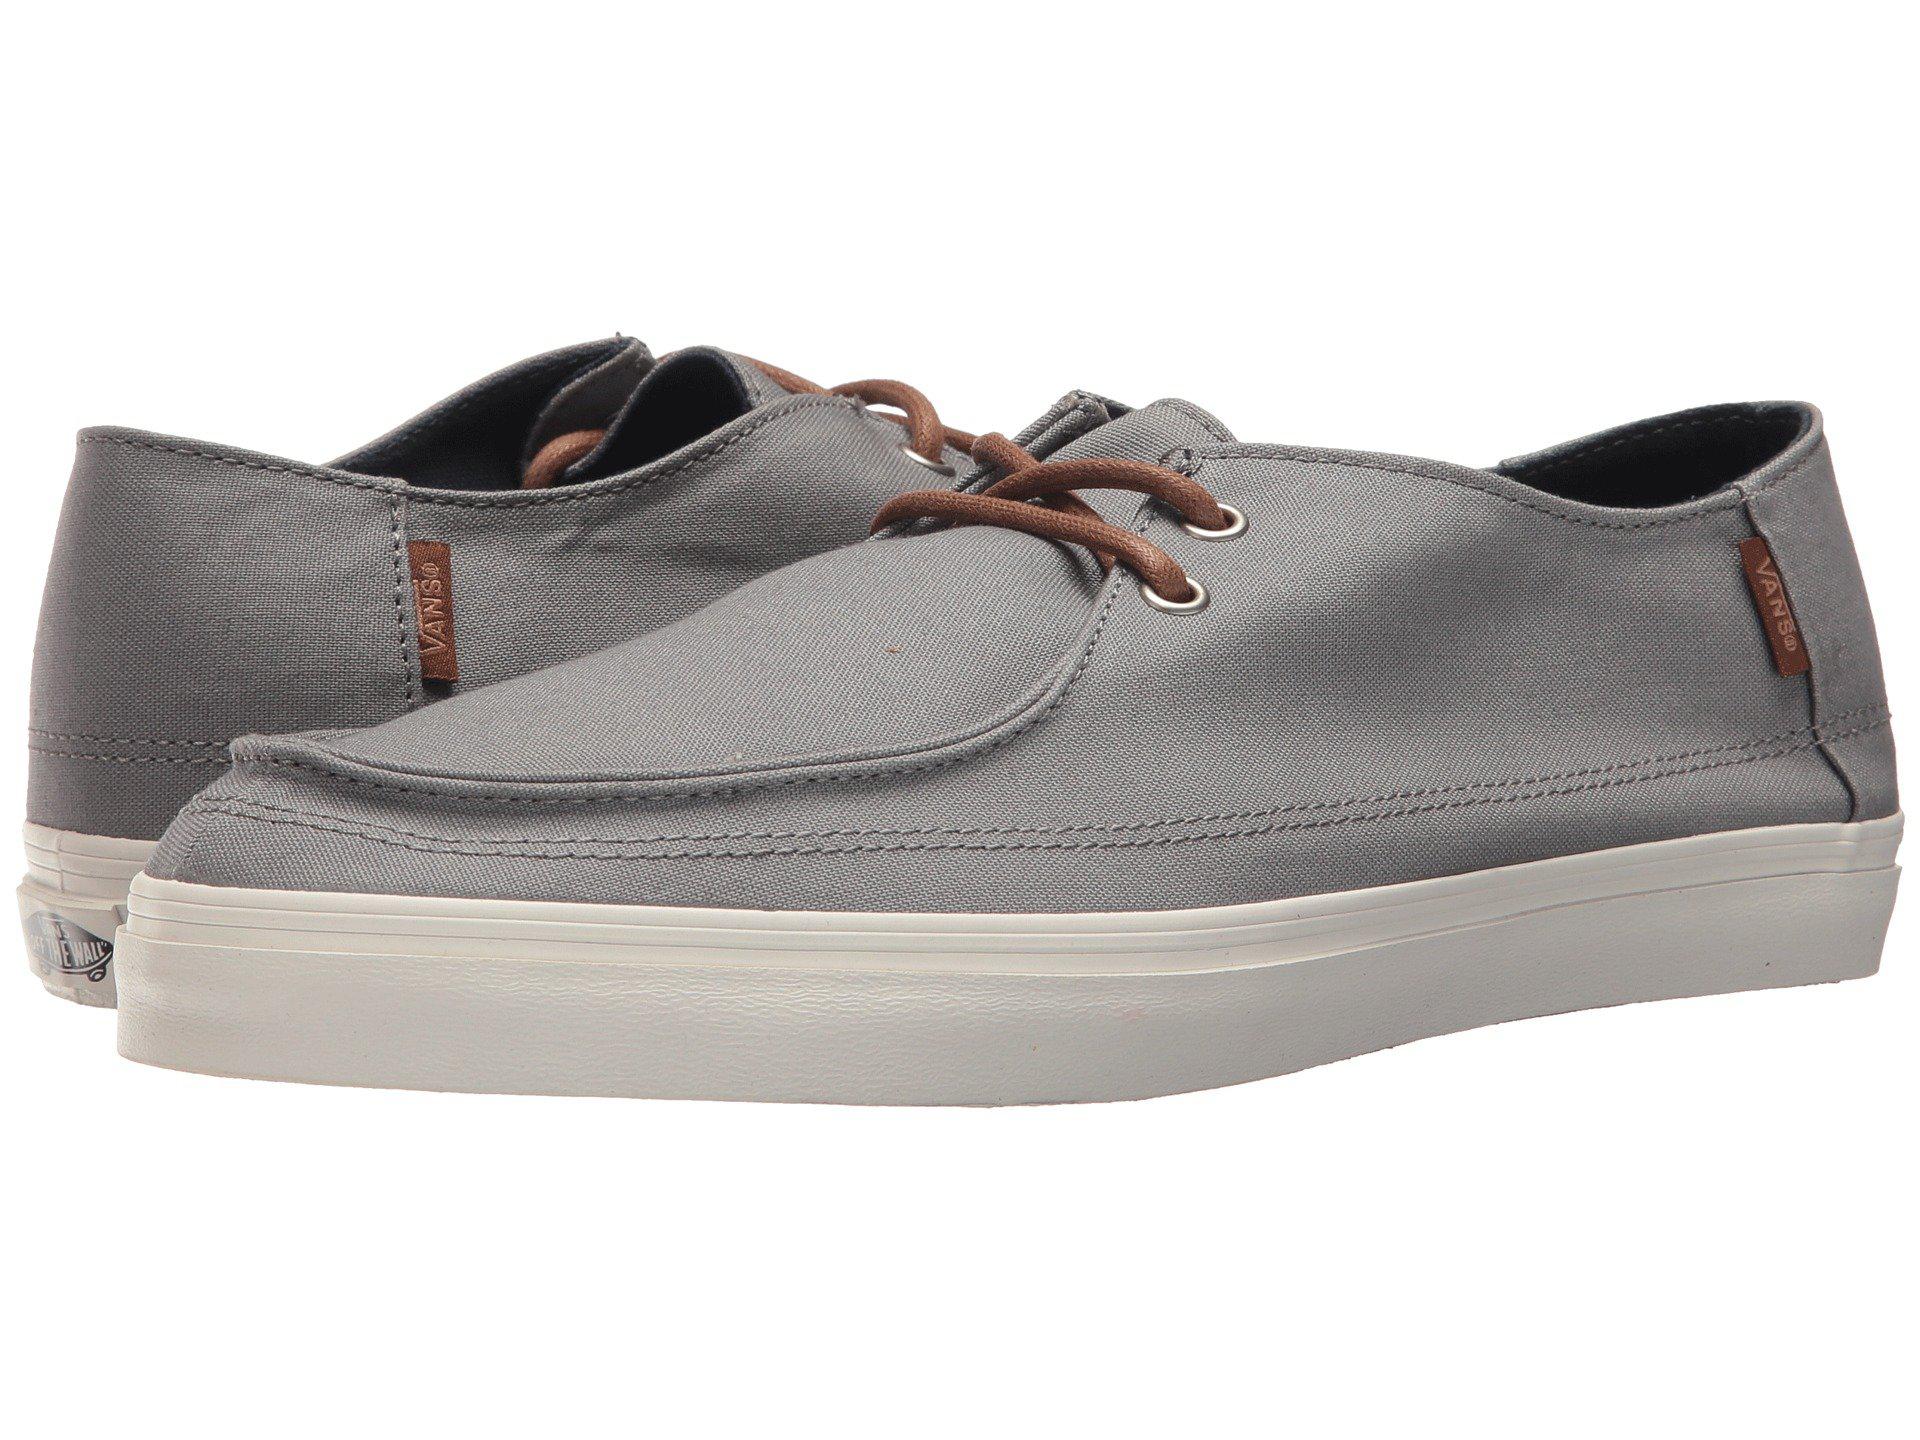 Vans Canvas Rata Vulc Sf in Gray for 